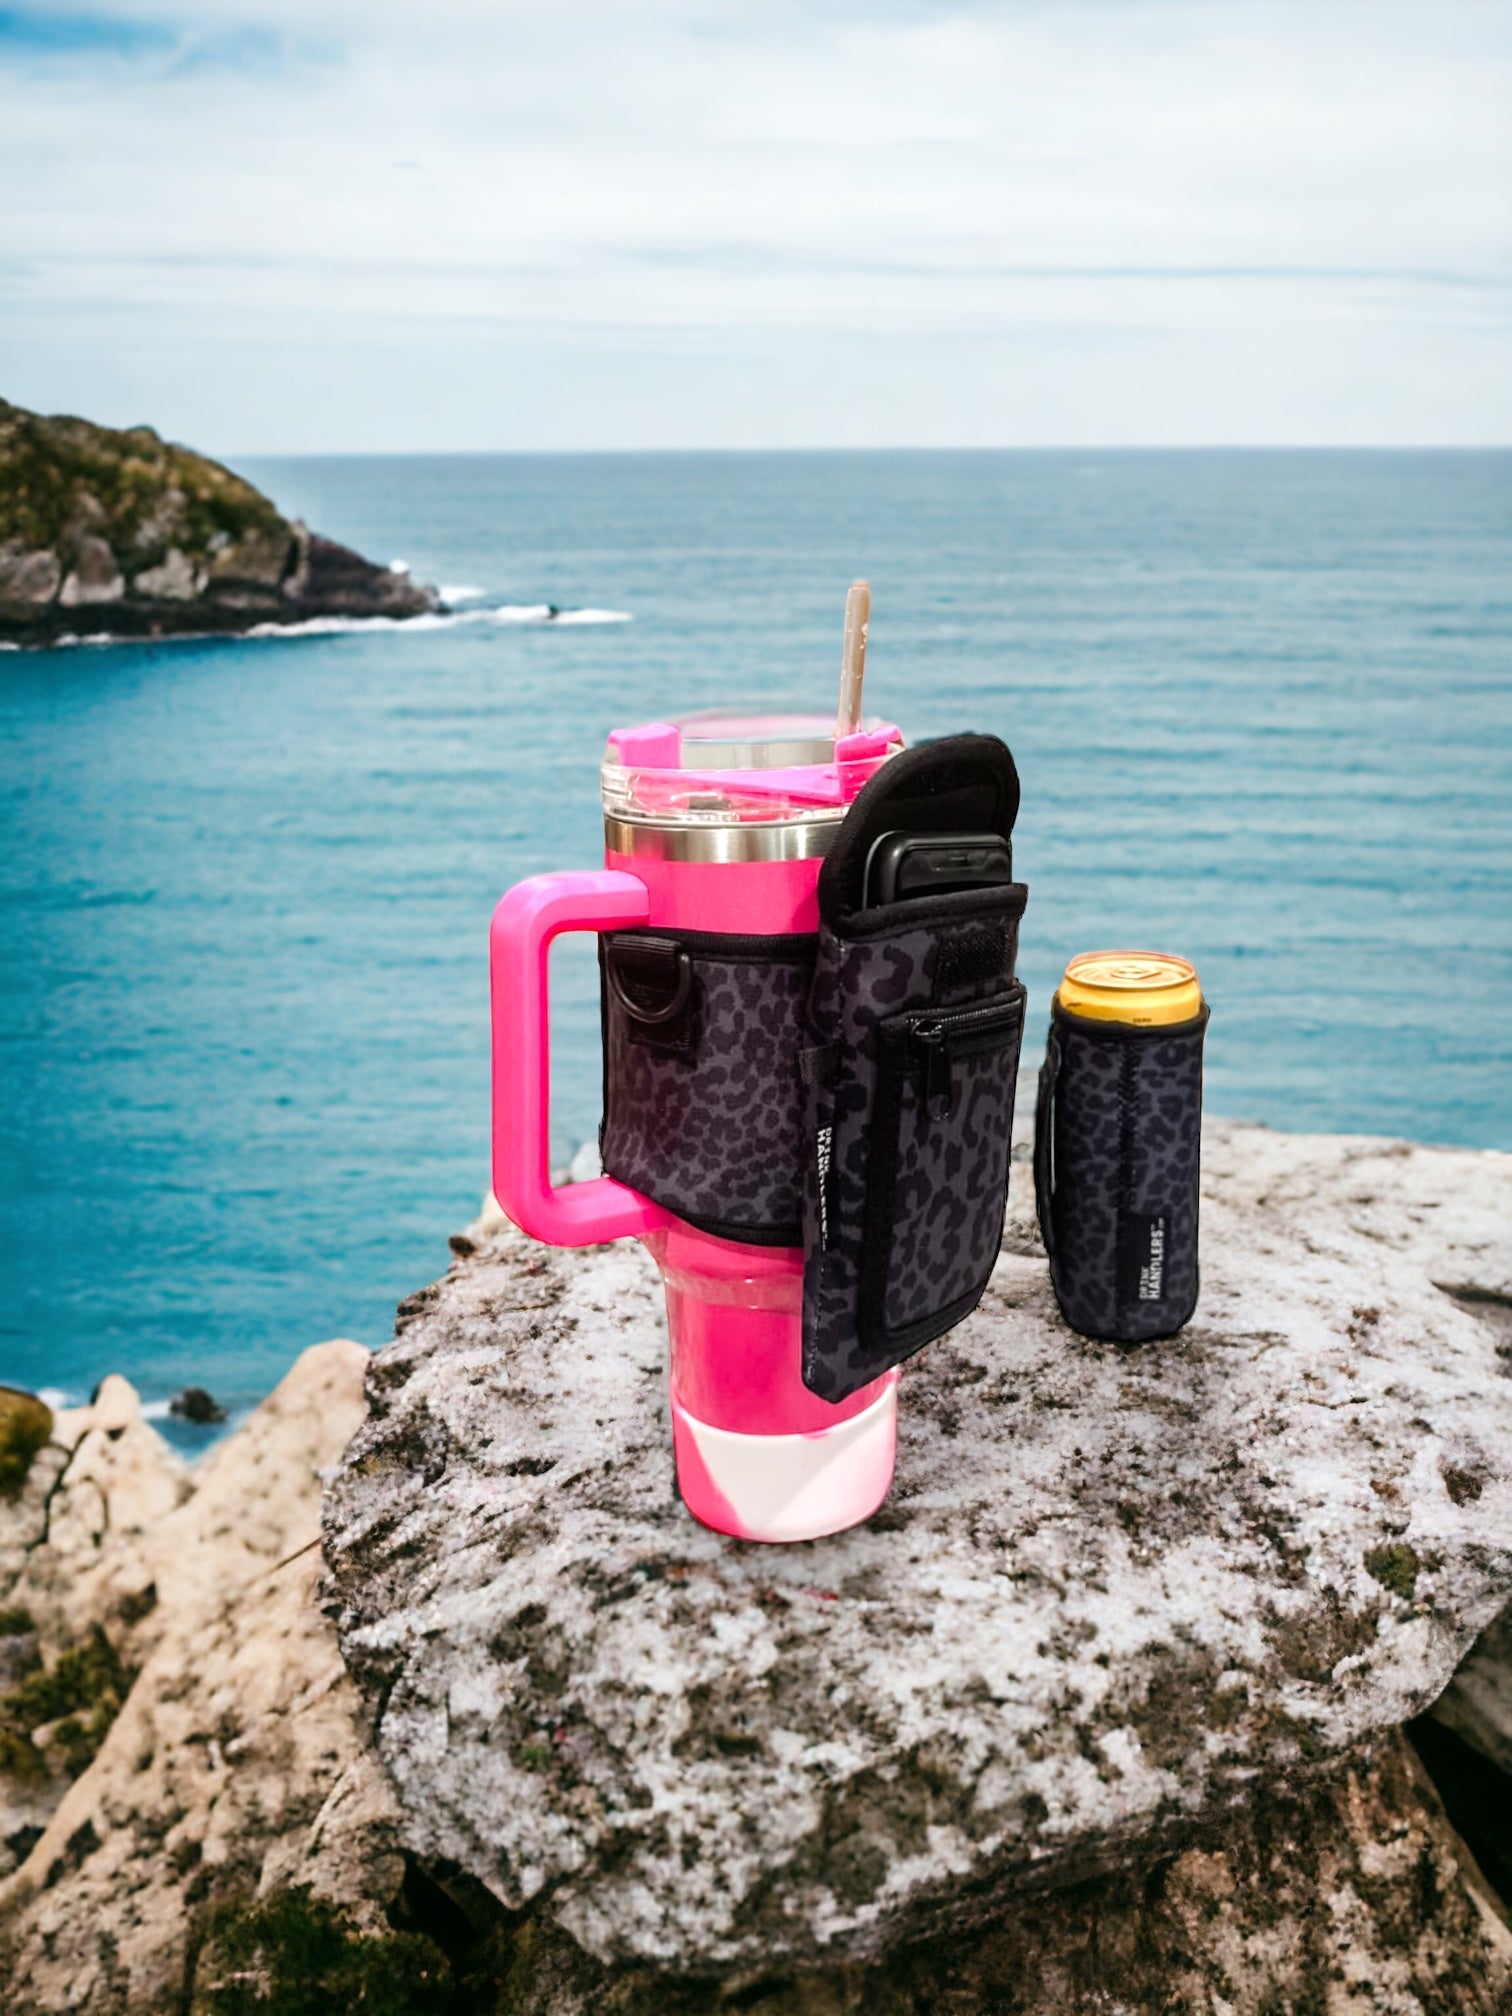 Fashion Cup Decoration Leather Cup Sleeve Insulated Cup Coat Water Bottle  Holder Carrier Cup Accessories Mug with Buckle Lanyard - China Cup Sleeve  and Sleeve Cover price